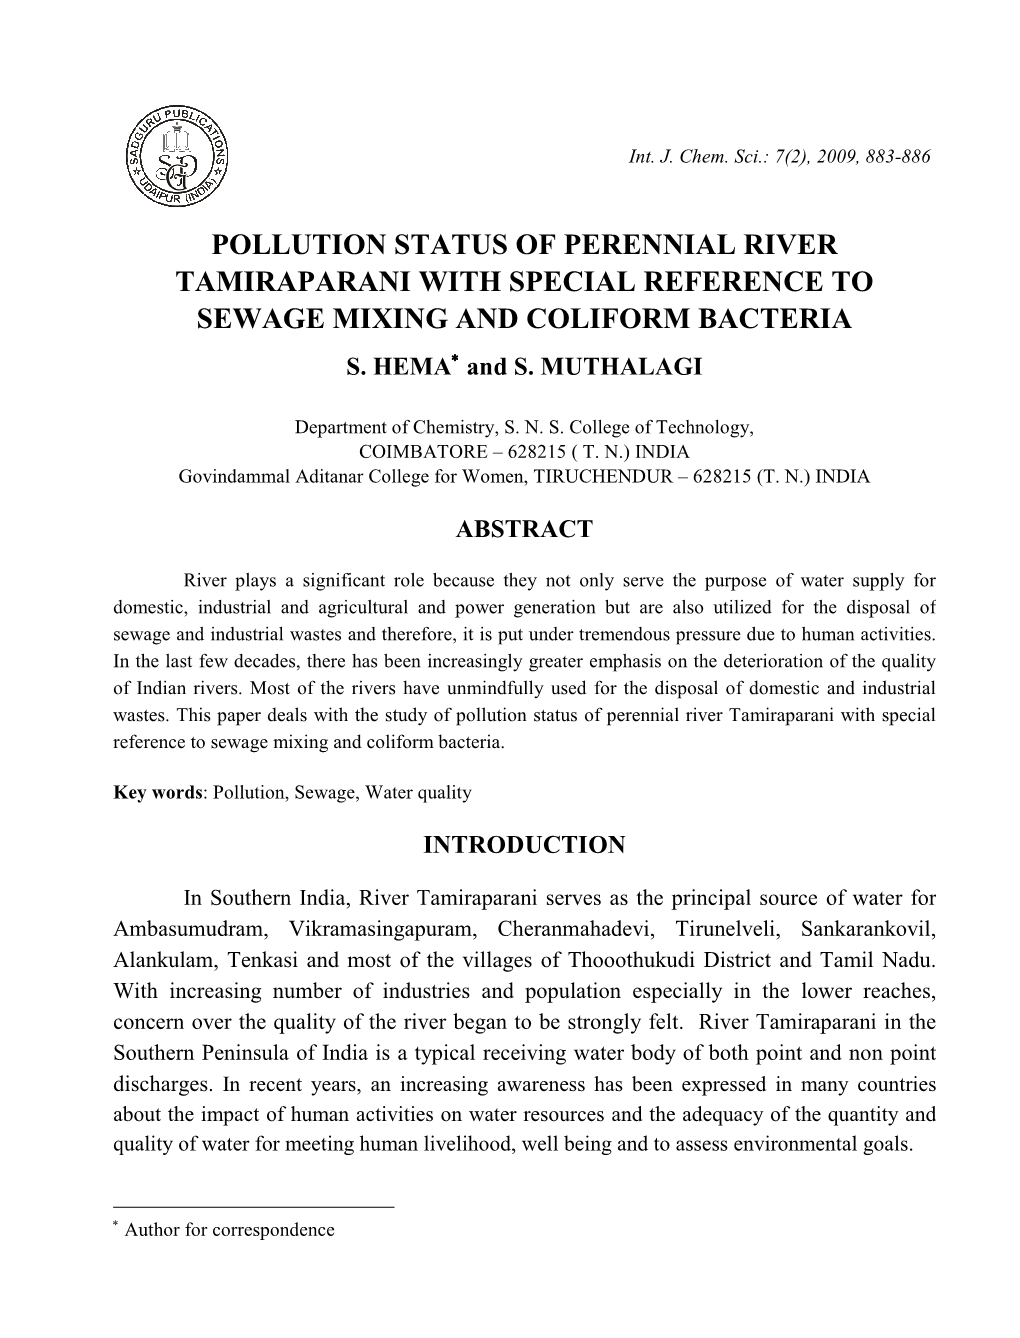 Pollution Status of Perennial River Tamiraparani with Special Reference to Sewage Mixing and Coliform Bacteria S